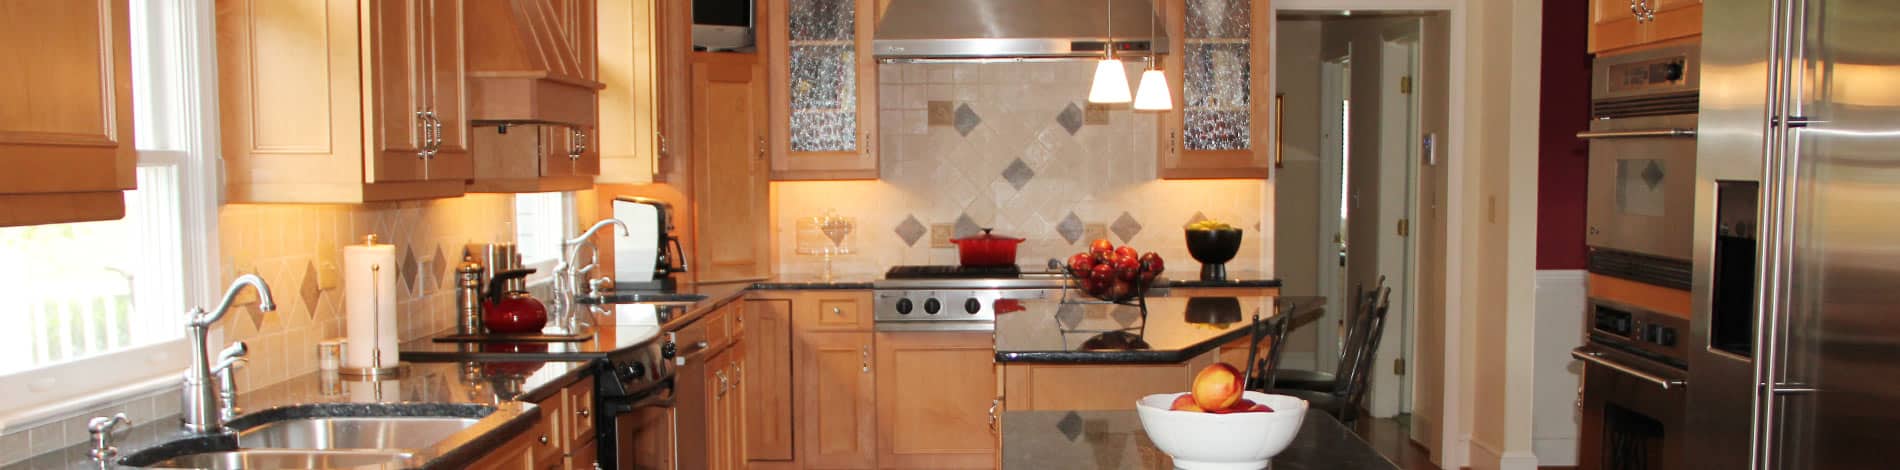 Check Out Our Collection of Kitchen Cabinets in Richmond, VA